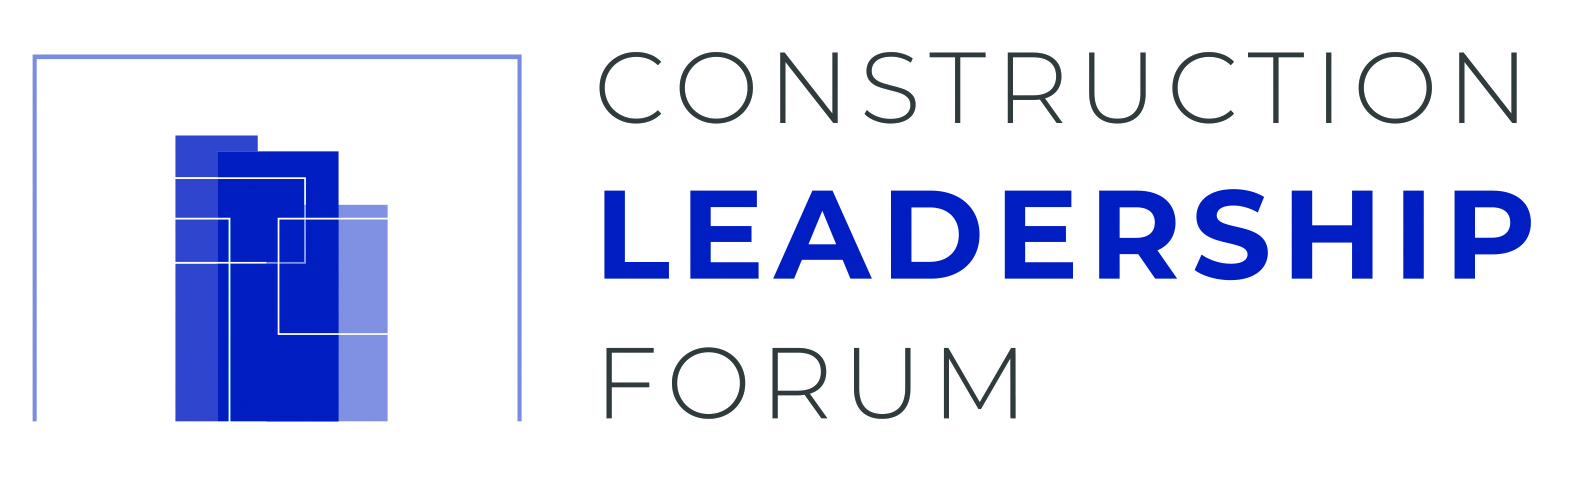 Events & Meetings 2020 VRCA Construction Leadership Forum